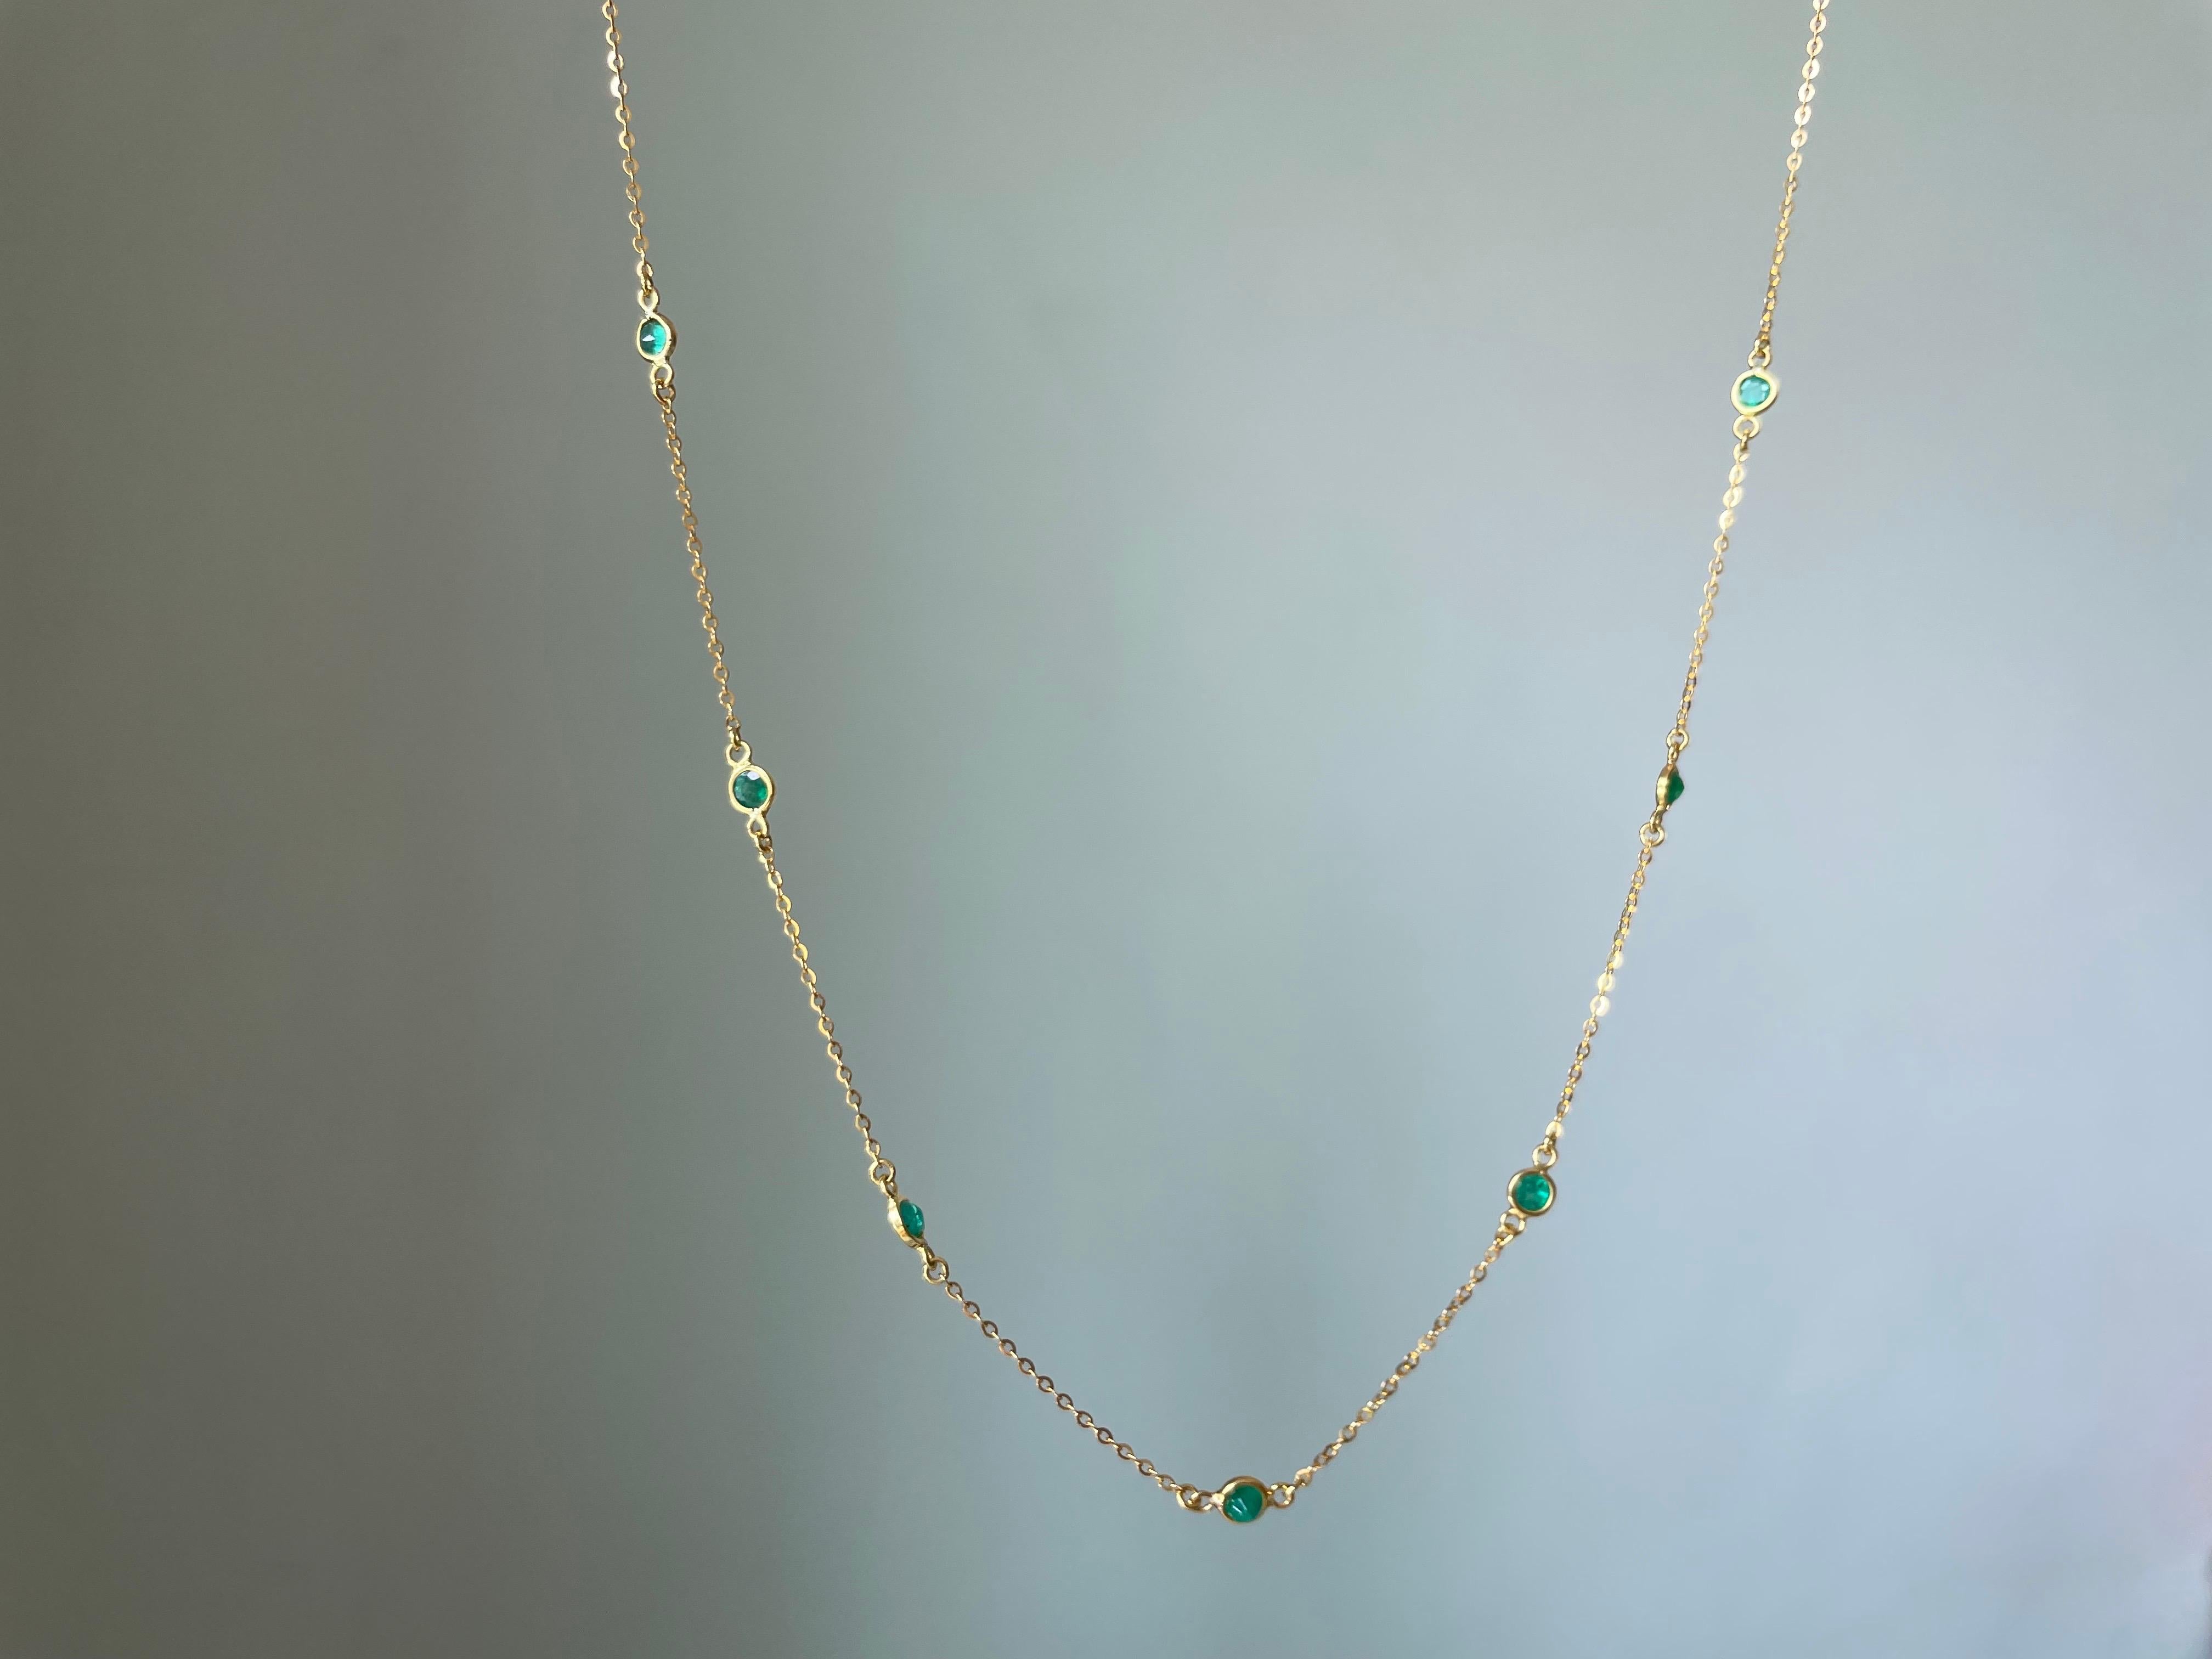 Brilliant Cut Natural Zambian Emerald by the yard, Natural Emeralds Station Necklace For Sale